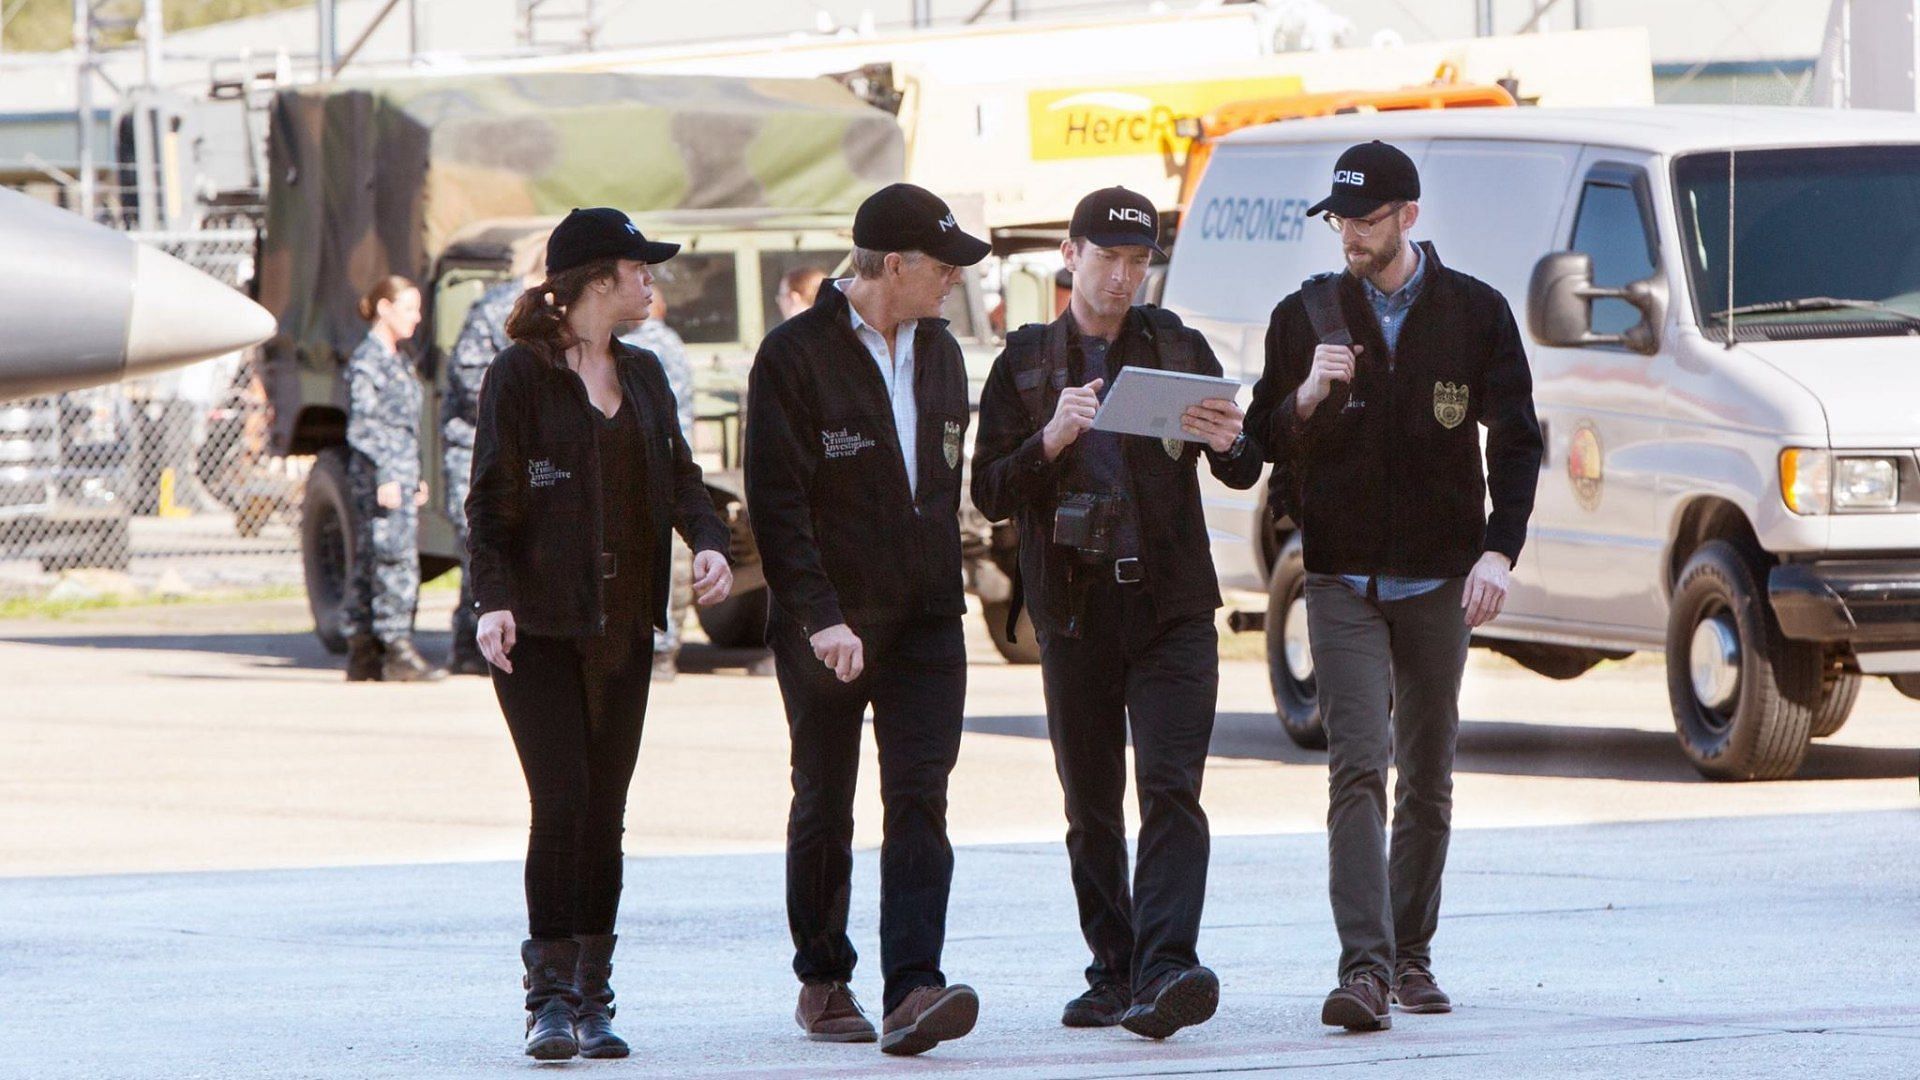 An image from the drama series NCIS - New Orleans (Image via Facebook/NCIS New Orleans)